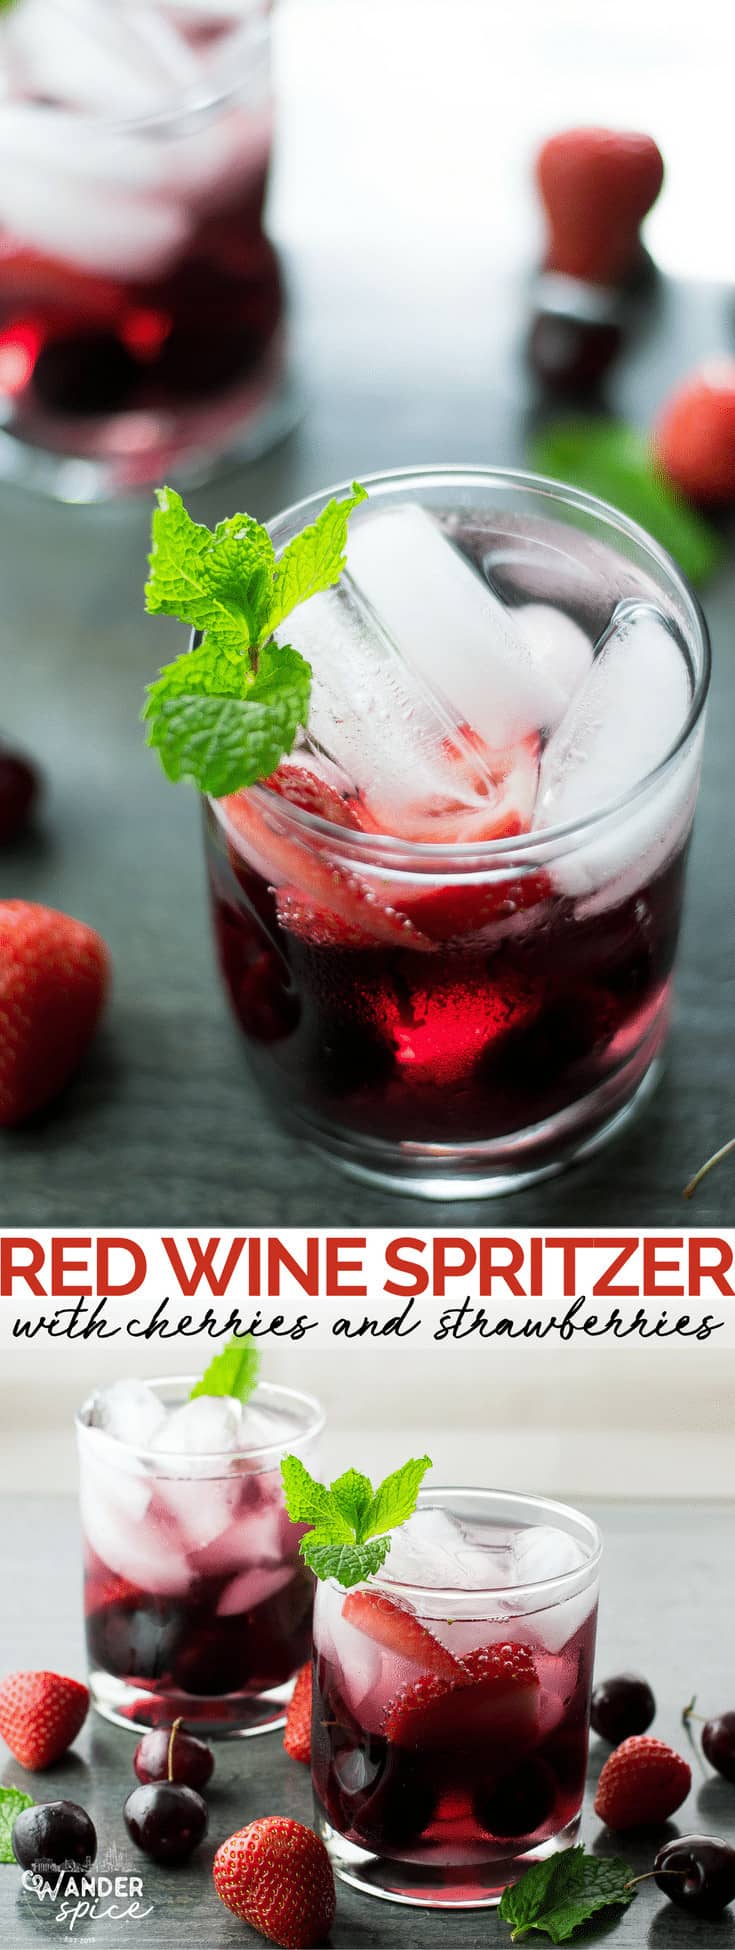 Red Wine Spritzer with Cherries and Strawberries. Red Wine | Cherries | Strawberries | Spritzer